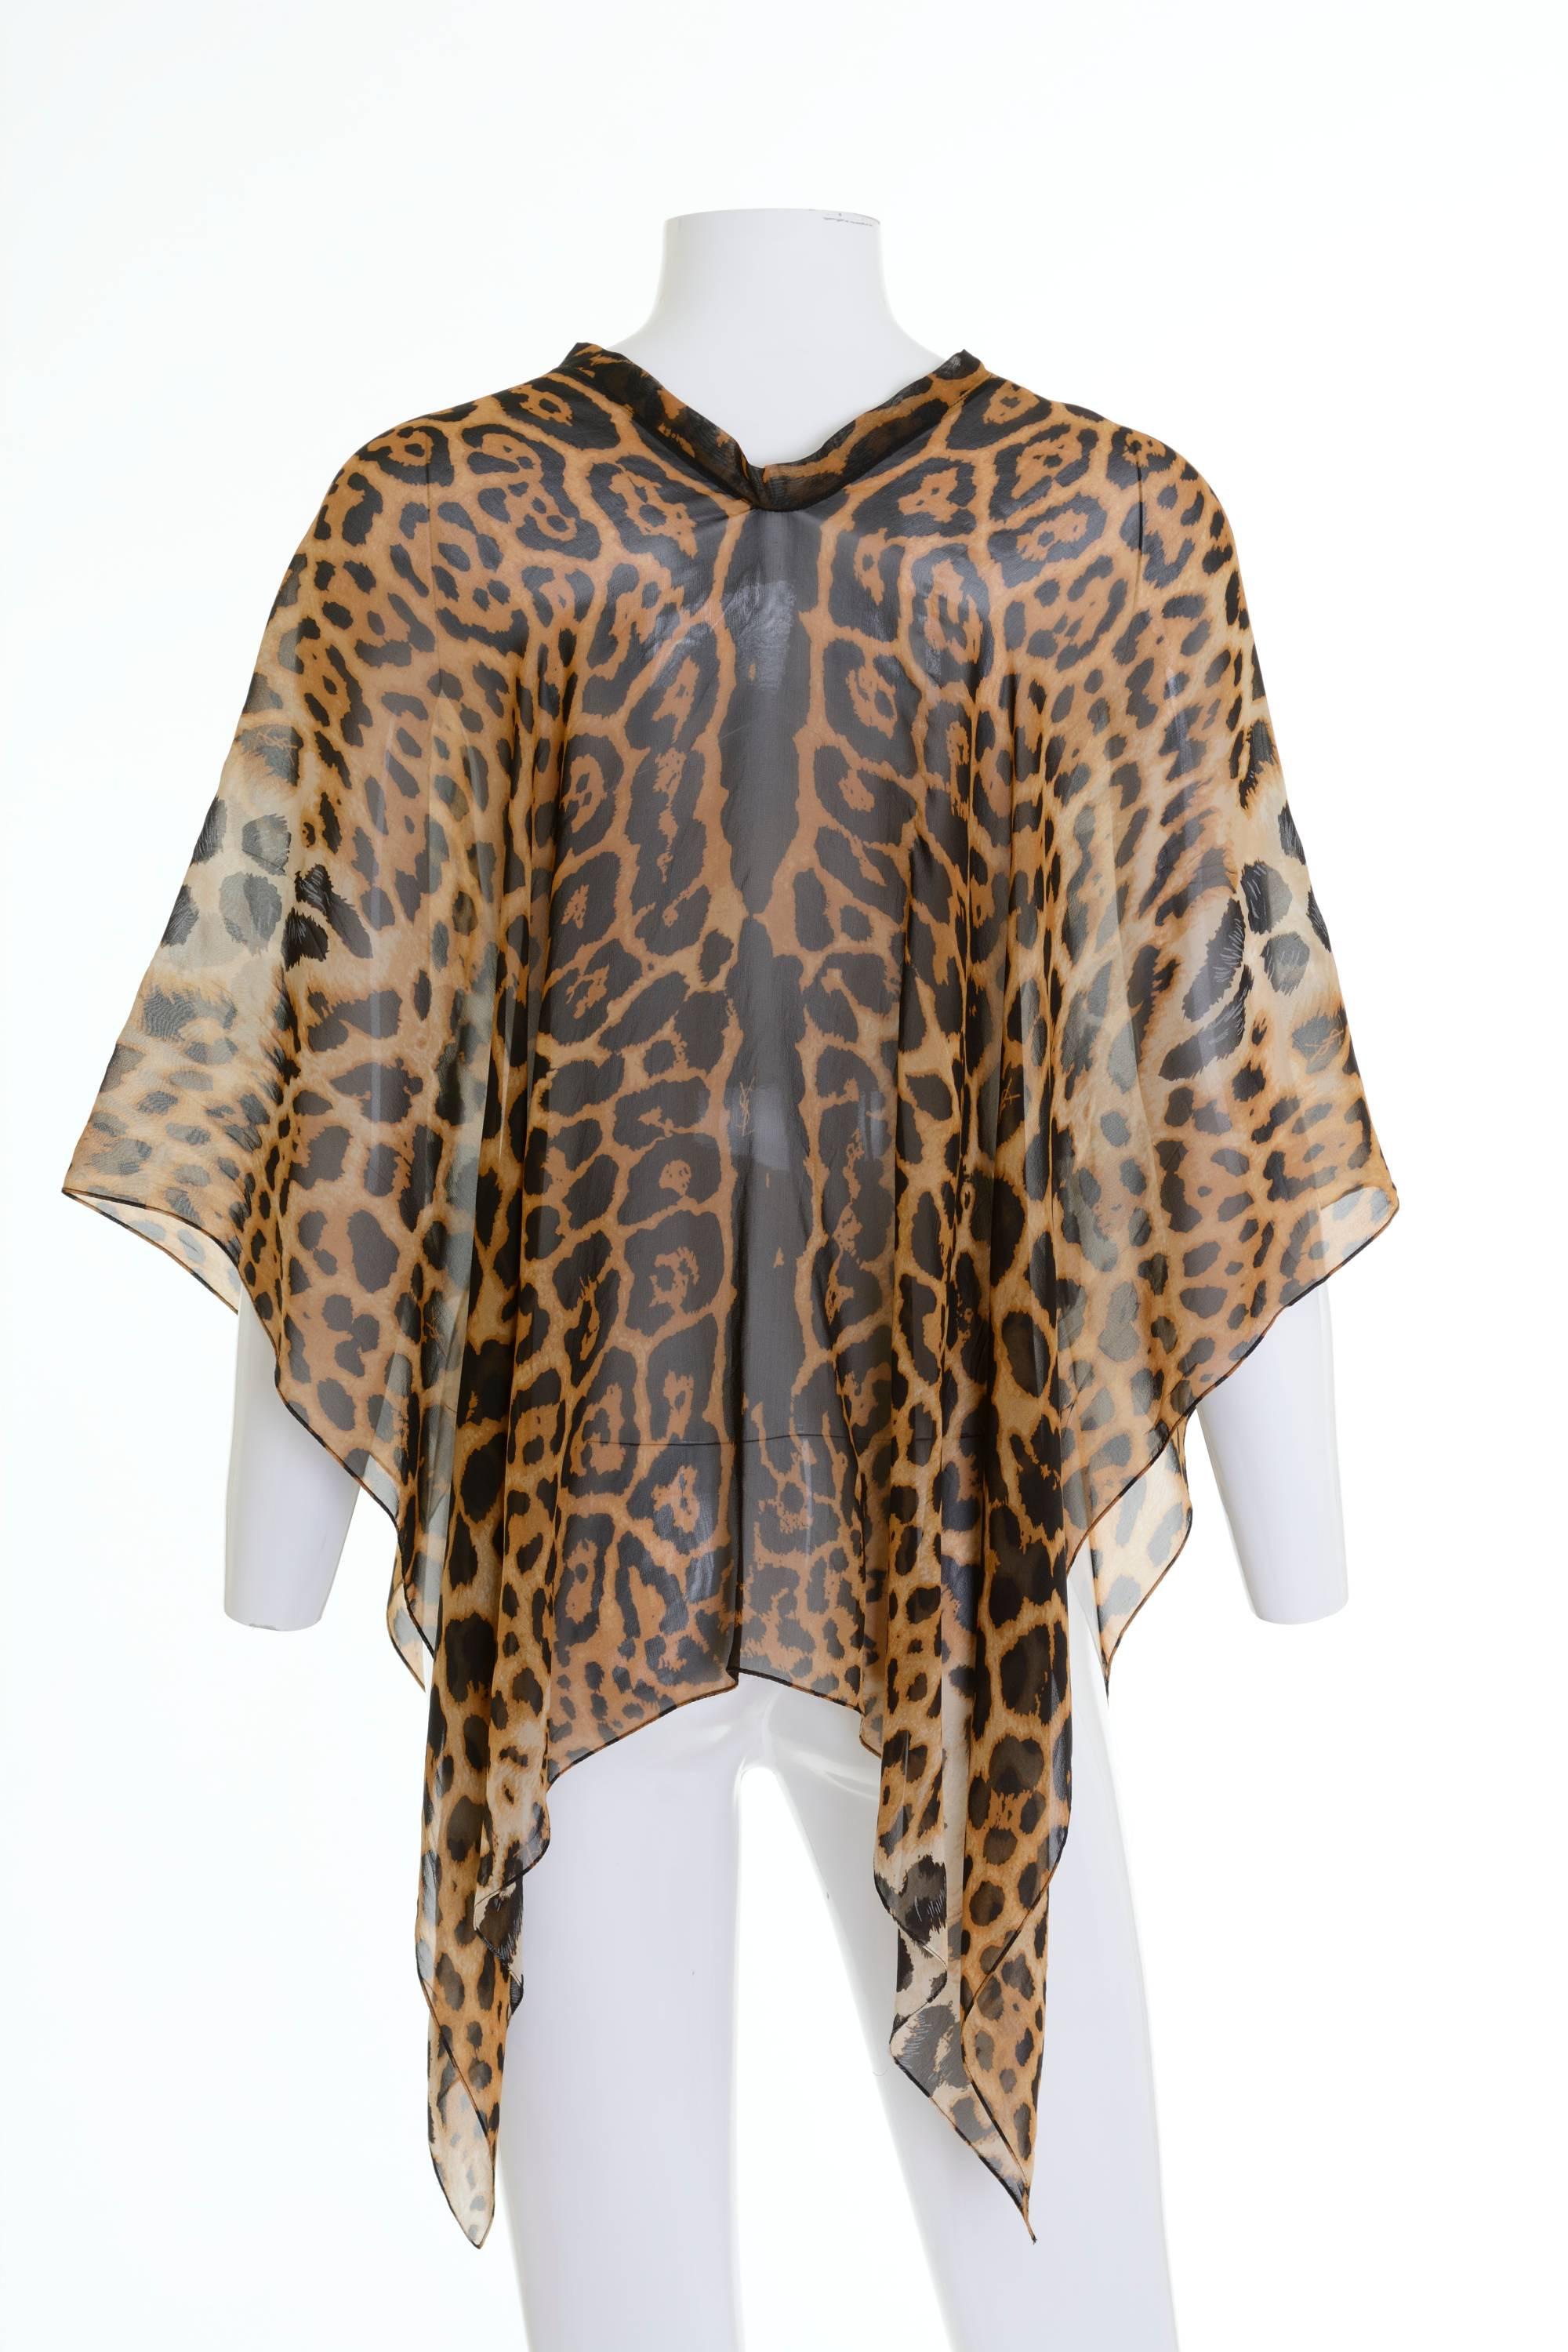 This lovely Yves Saint Laurent Rive Gauche Sheer Silk Leopard Print Poncho is Perfect beach cover up. Made in Italy 

Excellent Condition 

Lebel: Yves Saint Laurent Rive Gauche 
Material: Silk 
Color: Brown, Black, White 

Measurements 
Total